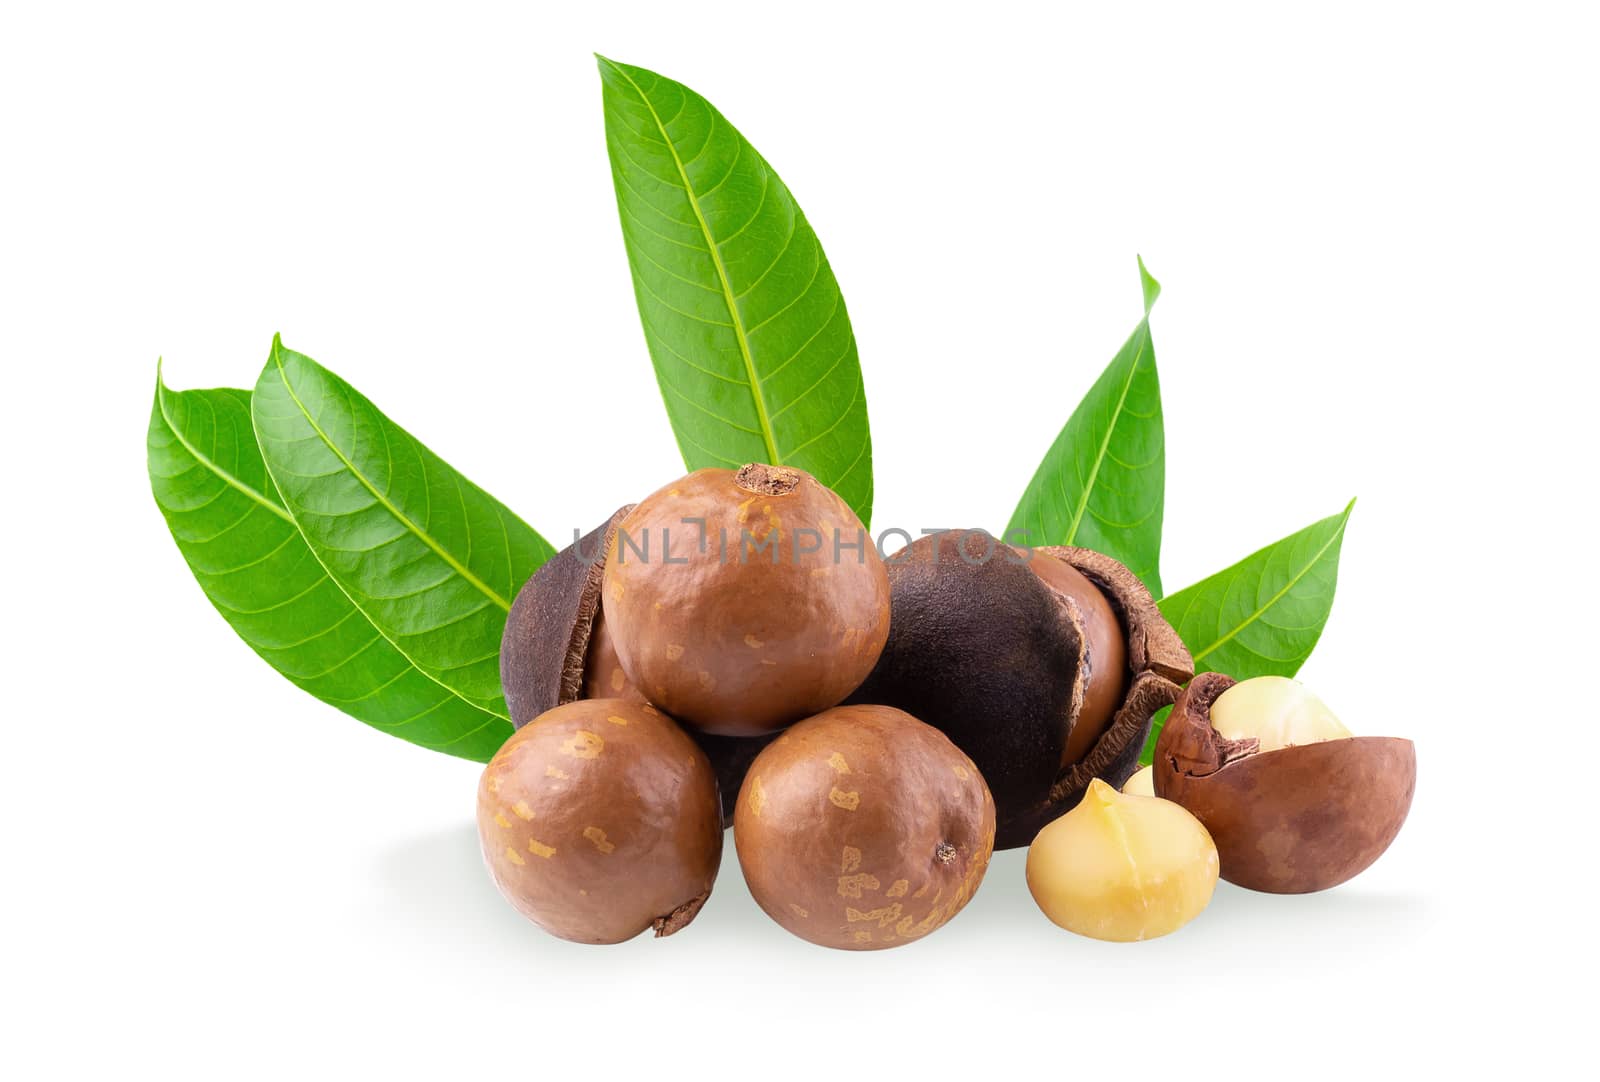 Macadamia nuts isolated over a white background.